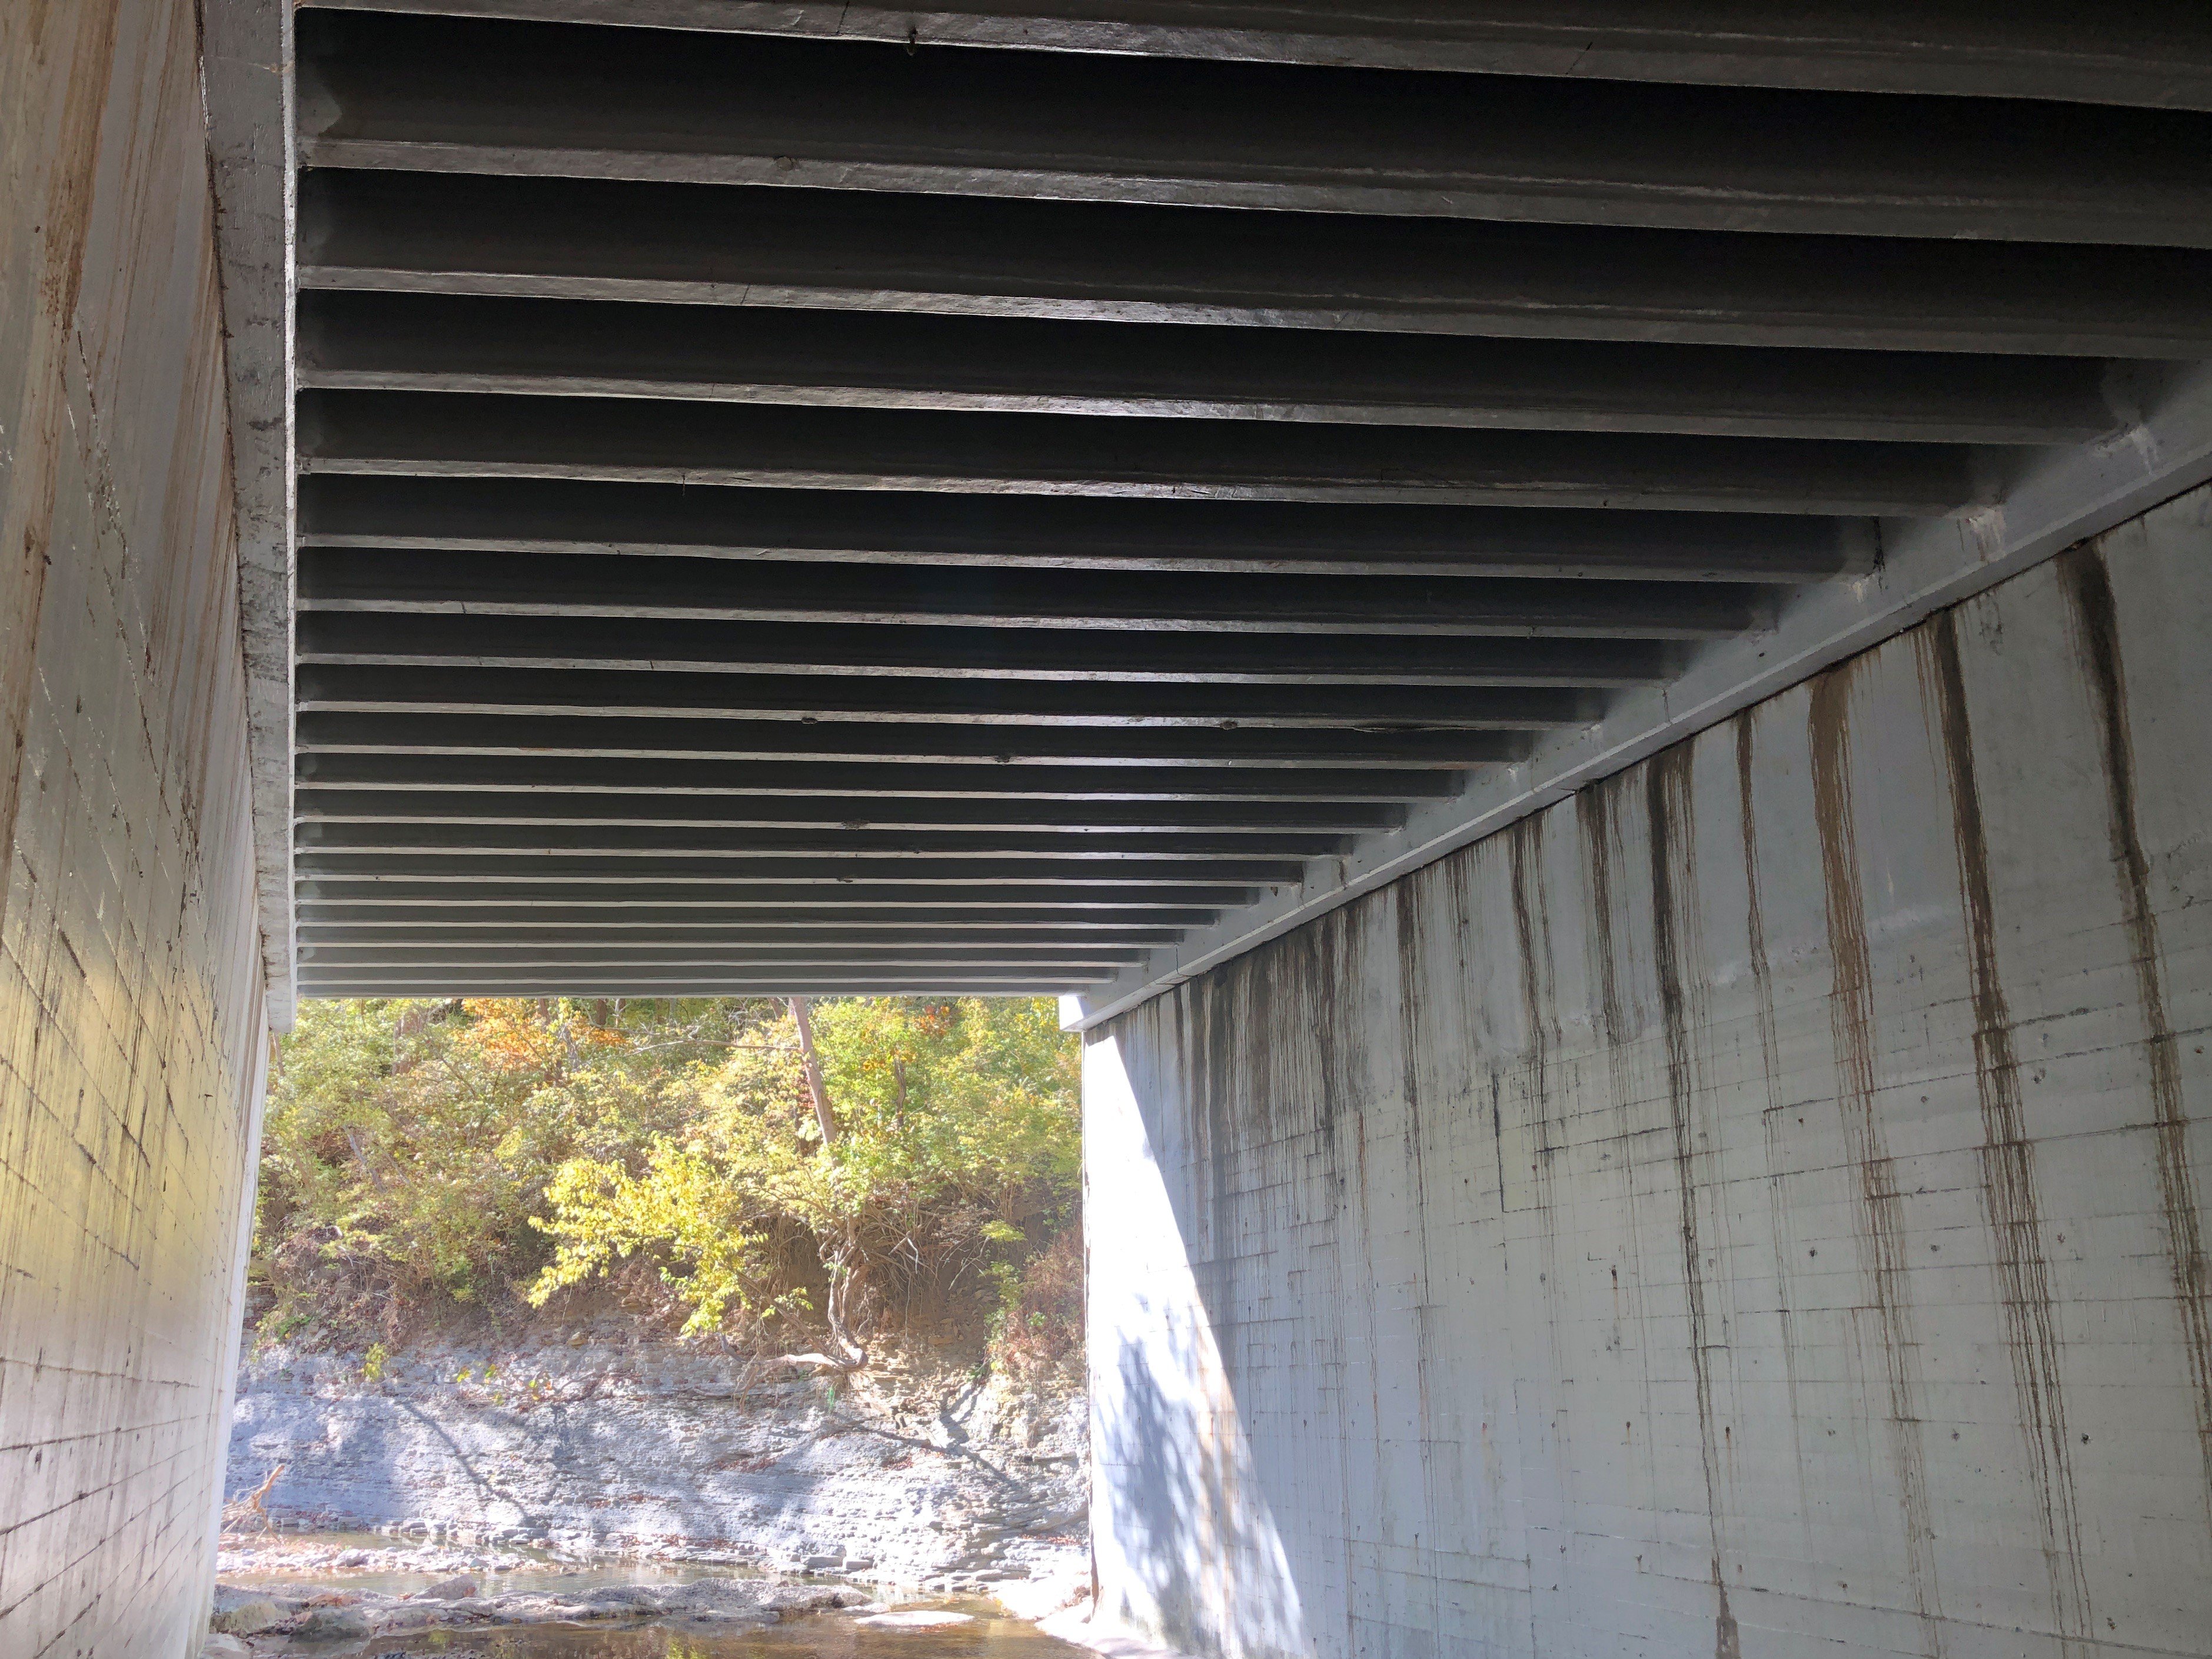 10 Years Later Eight Mile Road’s FRP Bridge Deck & Beam System Is Like New